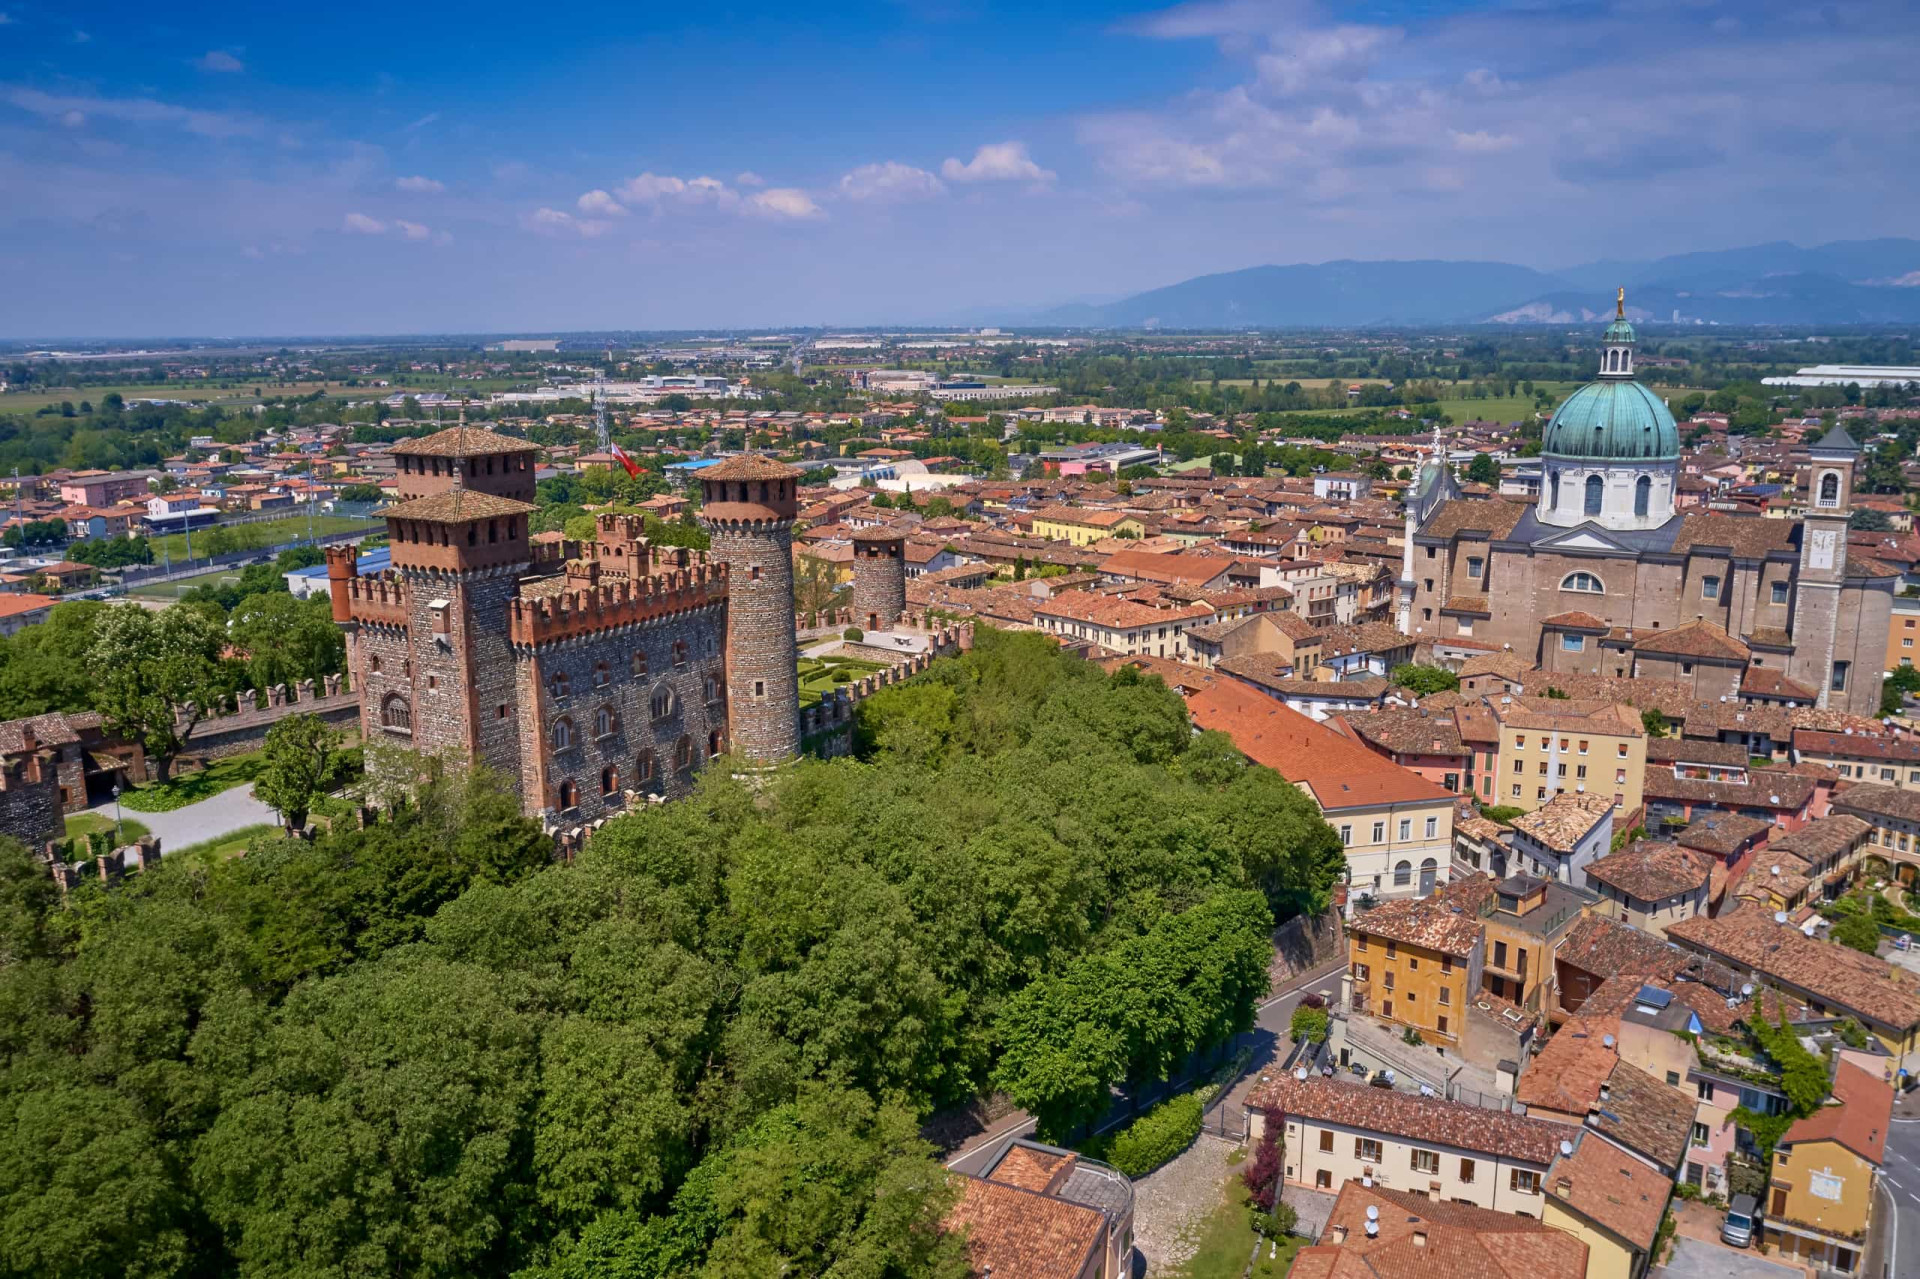 <p>Found in the province of Brescia, handsome Montichiari in Italy's Lombardy region holds many treasures, among them a sturdy medieval <a href="https://www.starsinsider.com/travel/216856/breathtaking-castles-that-look-straight-out-of-a-fairy-tale" rel="noopener">castle</a> and one of the best-preserved Romanesque abbeys in the northern Italy.</p><p>You may also like:<a href="https://www.starsinsider.com/n/437521?utm_source=msn.com&utm_medium=display&utm_campaign=referral_description&utm_content=481361v4en-en_selected"> The famous friends of Jeffrey Epstein</a></p>